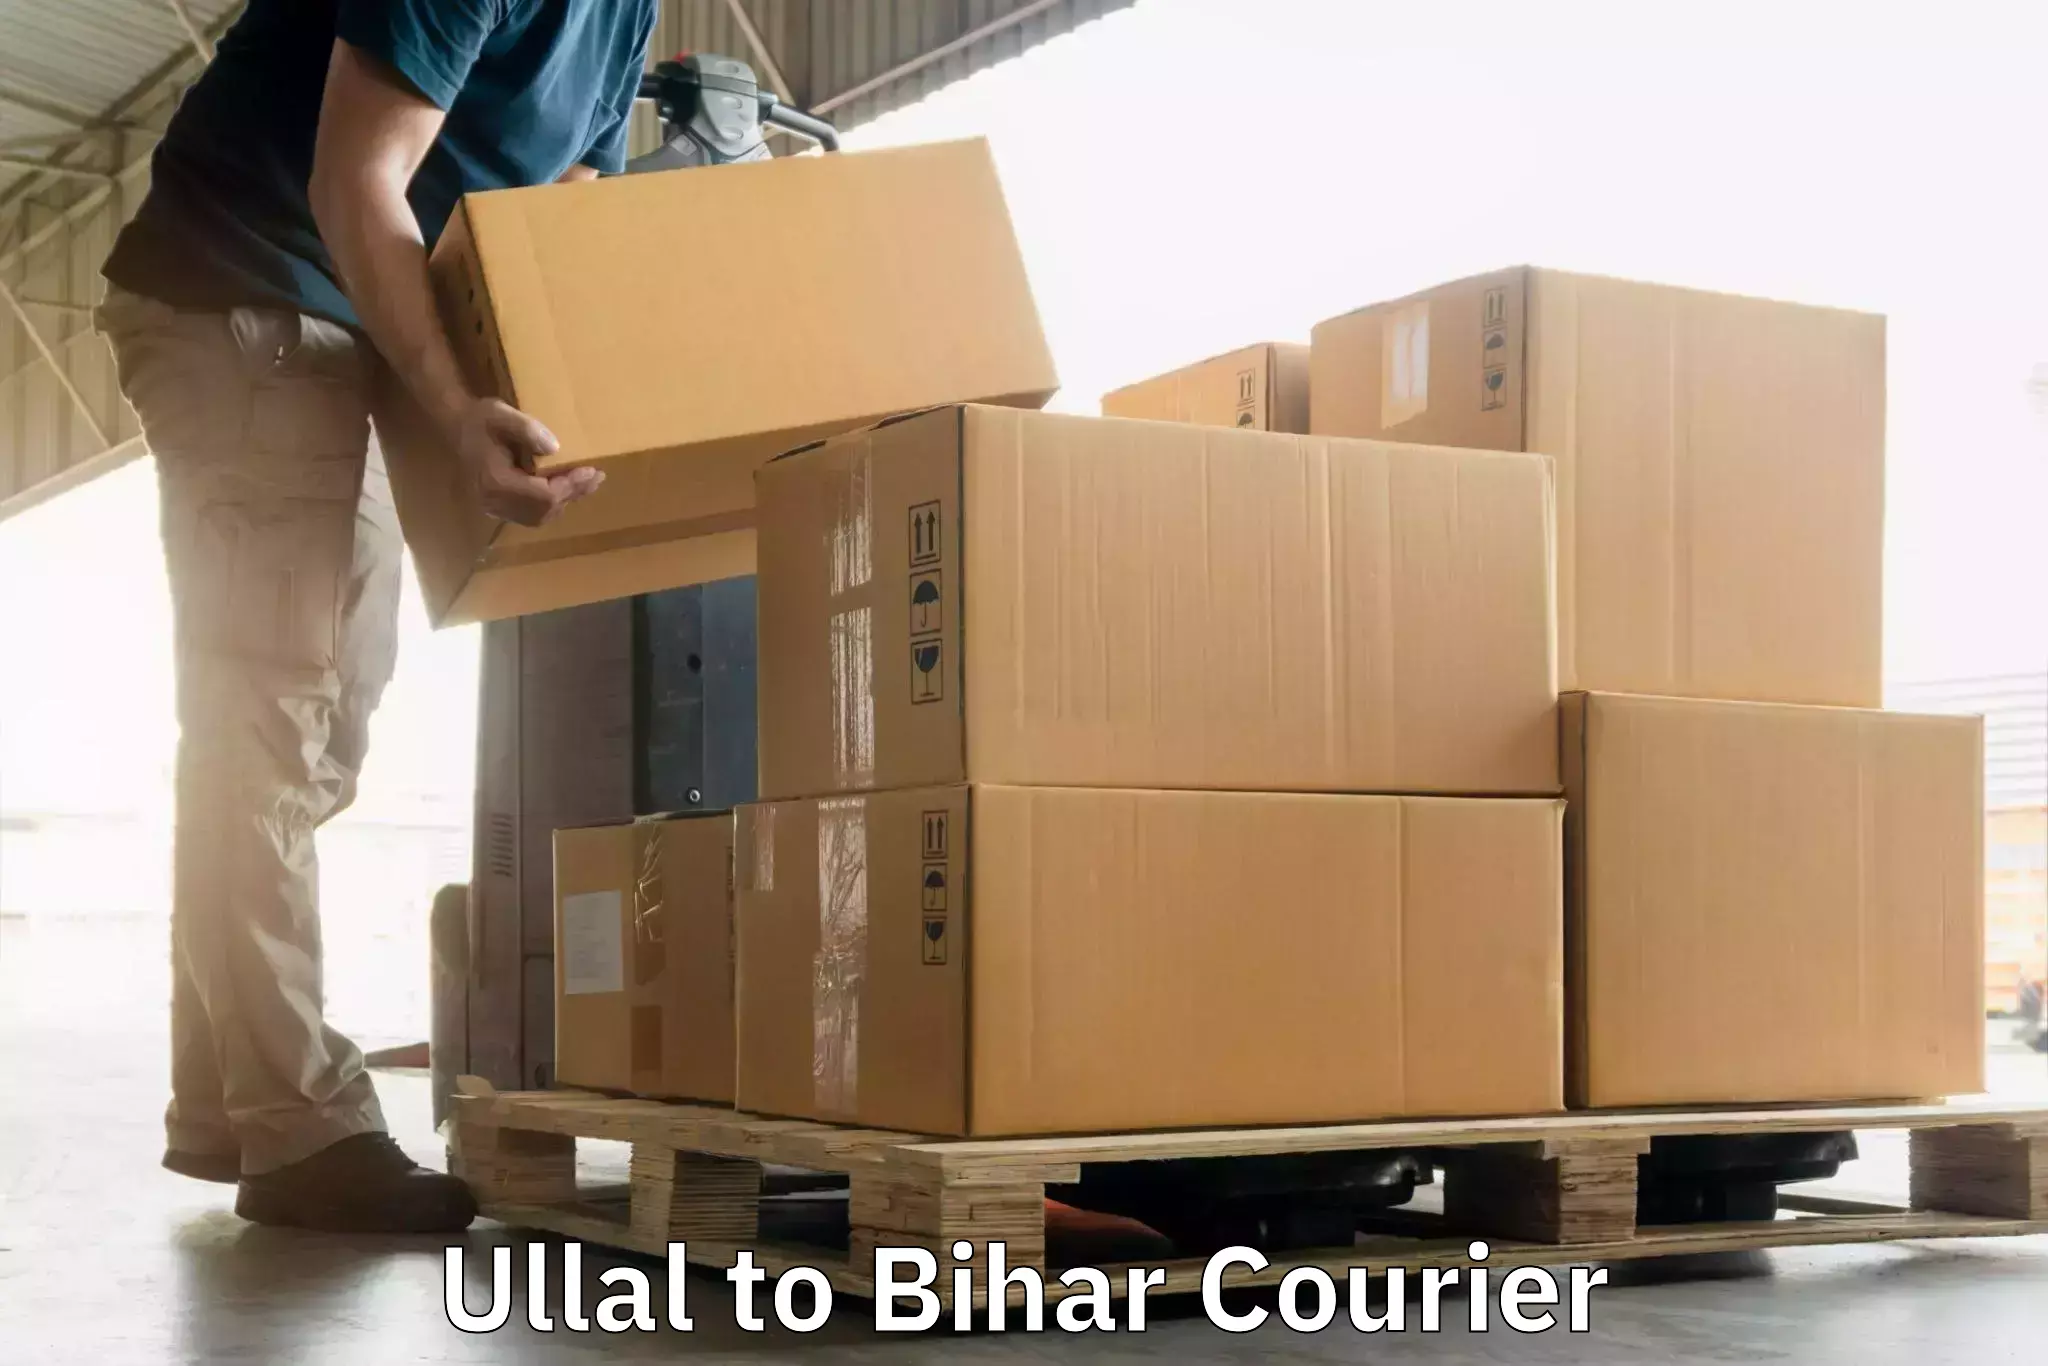 Customizable delivery plans Ullal to Sirdala